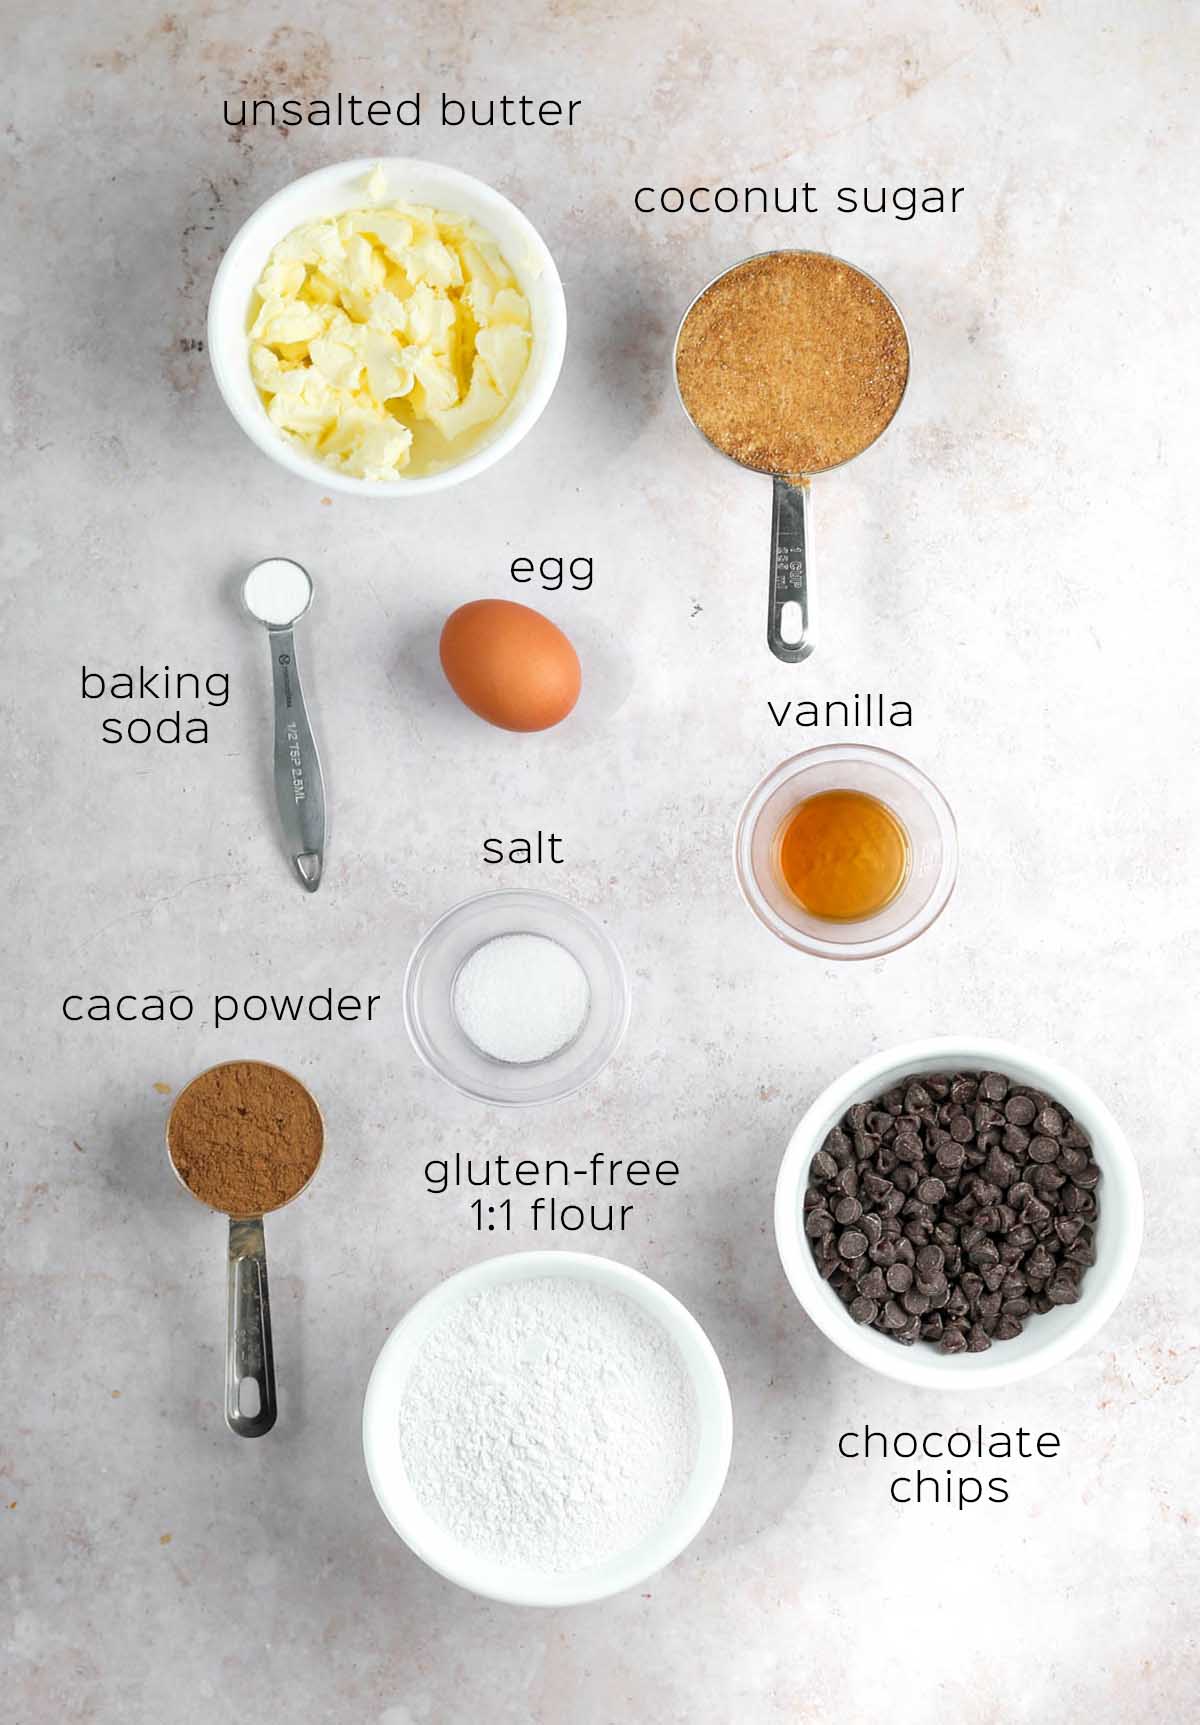 all ingredients to make the cookies, prepared in small bowls and measuring cups on a table.